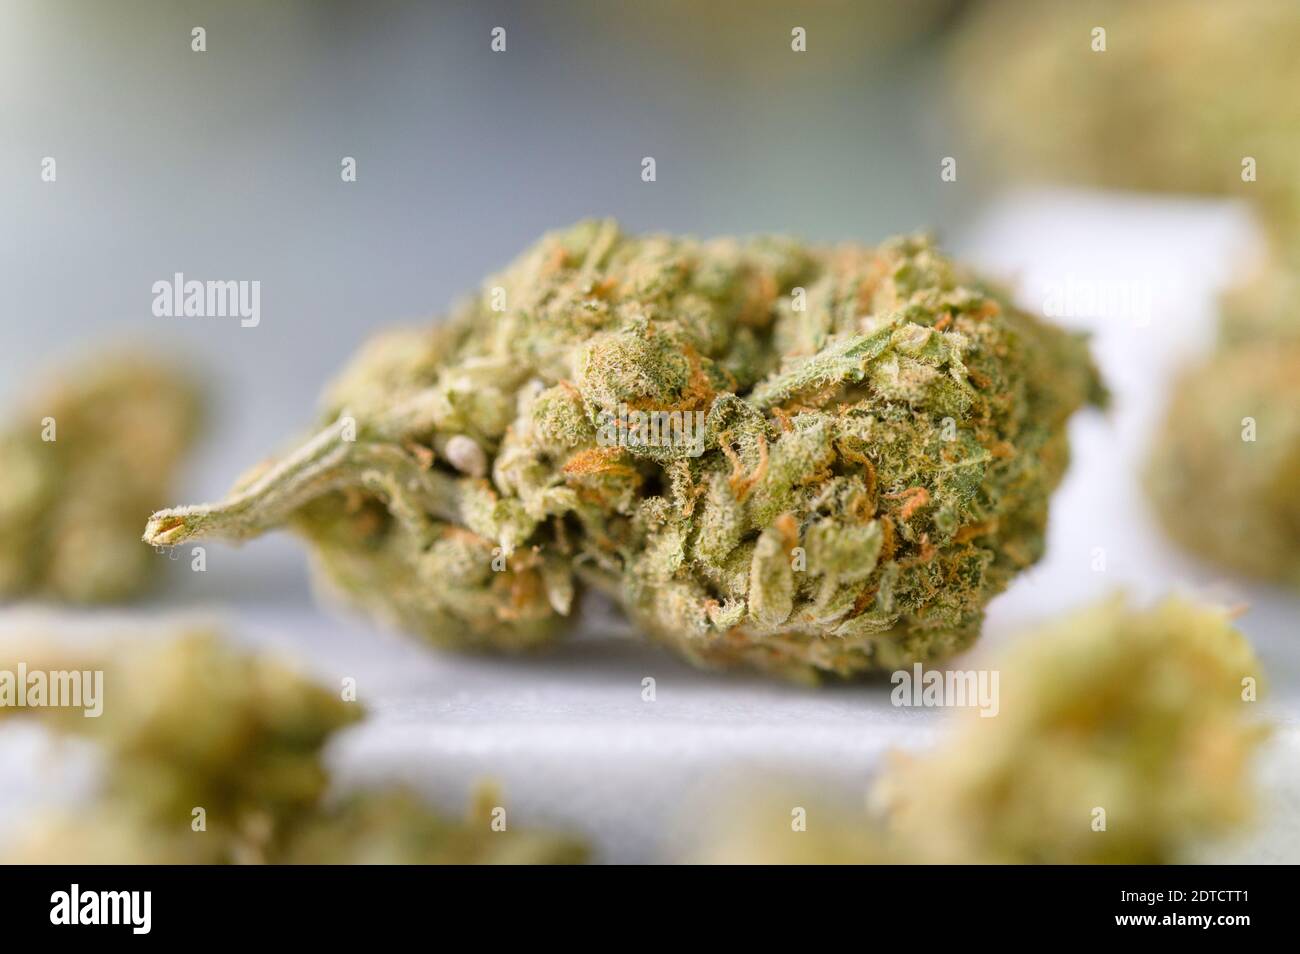 Close-up of cannabis buds Stock Photo